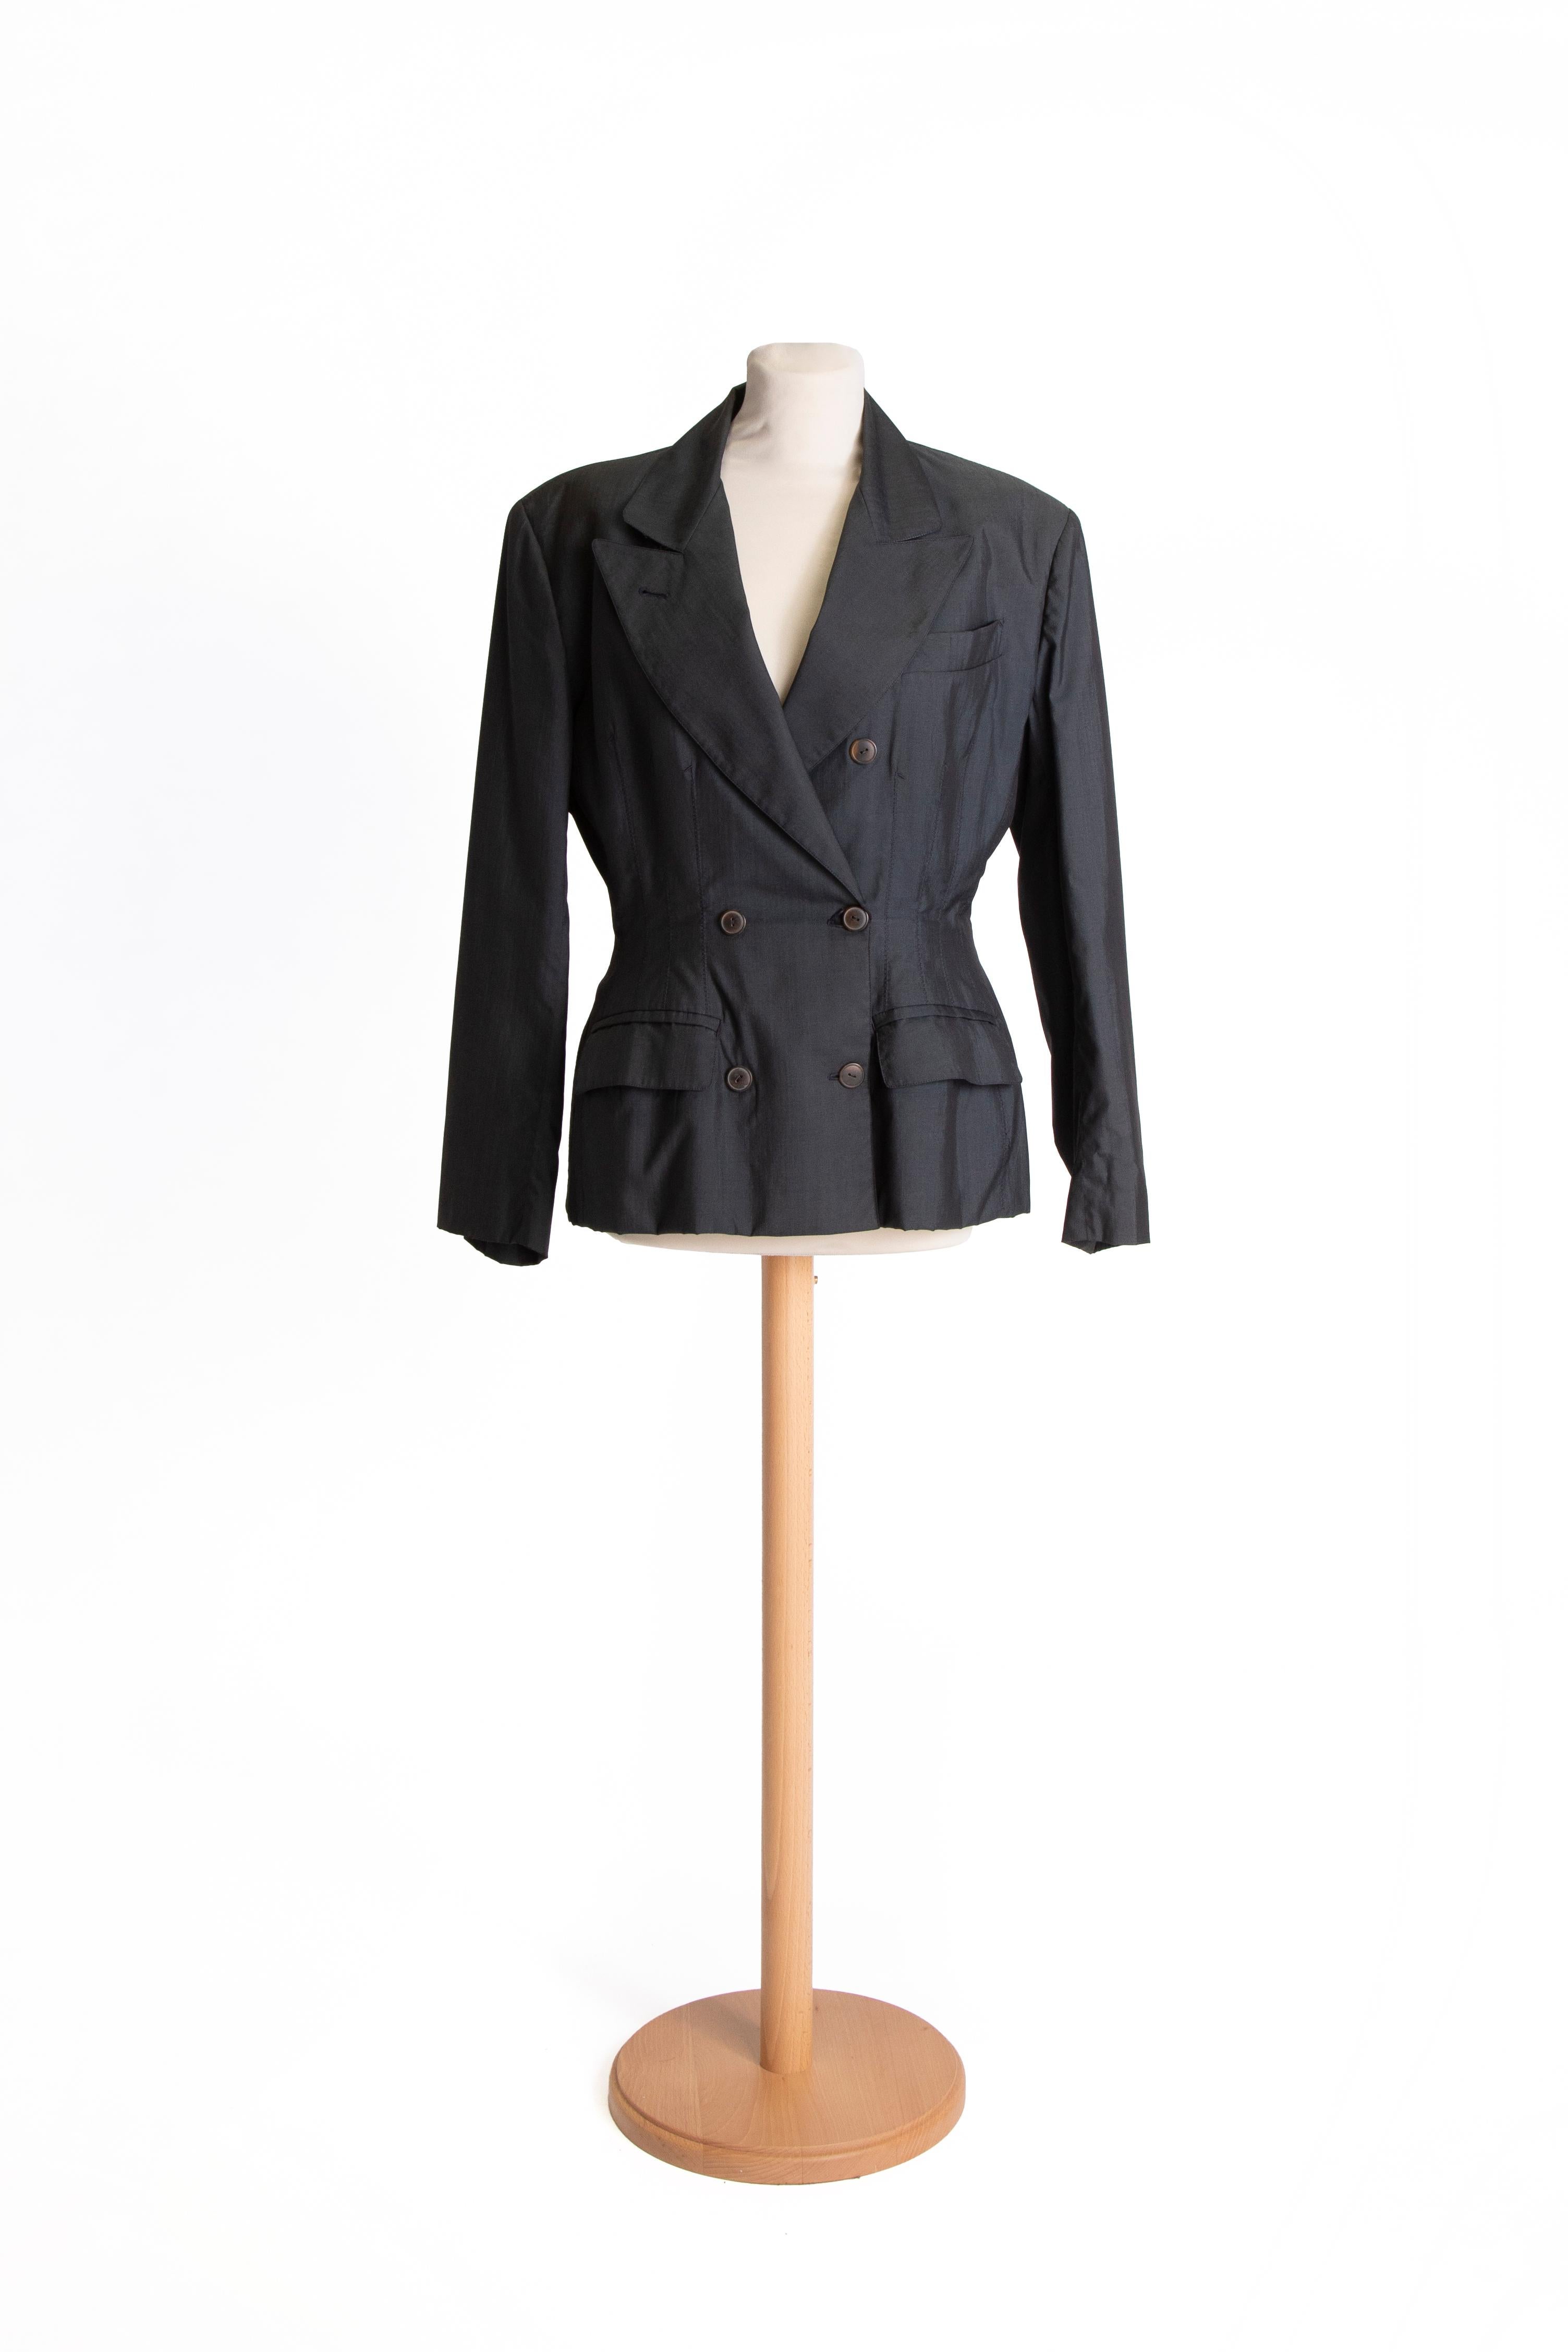 1980s Double-breasted charcoal fitted Jean Paul Gaultier blazer, tight at the waist with decorative pleats on the front.

SIZE IT: 44
SIZE USA: 10

MEASURES:
Shoulders: 44 cm
CIRC Bust: 104 cm
CIRC Waist: 80 cm
Length: 65 cm